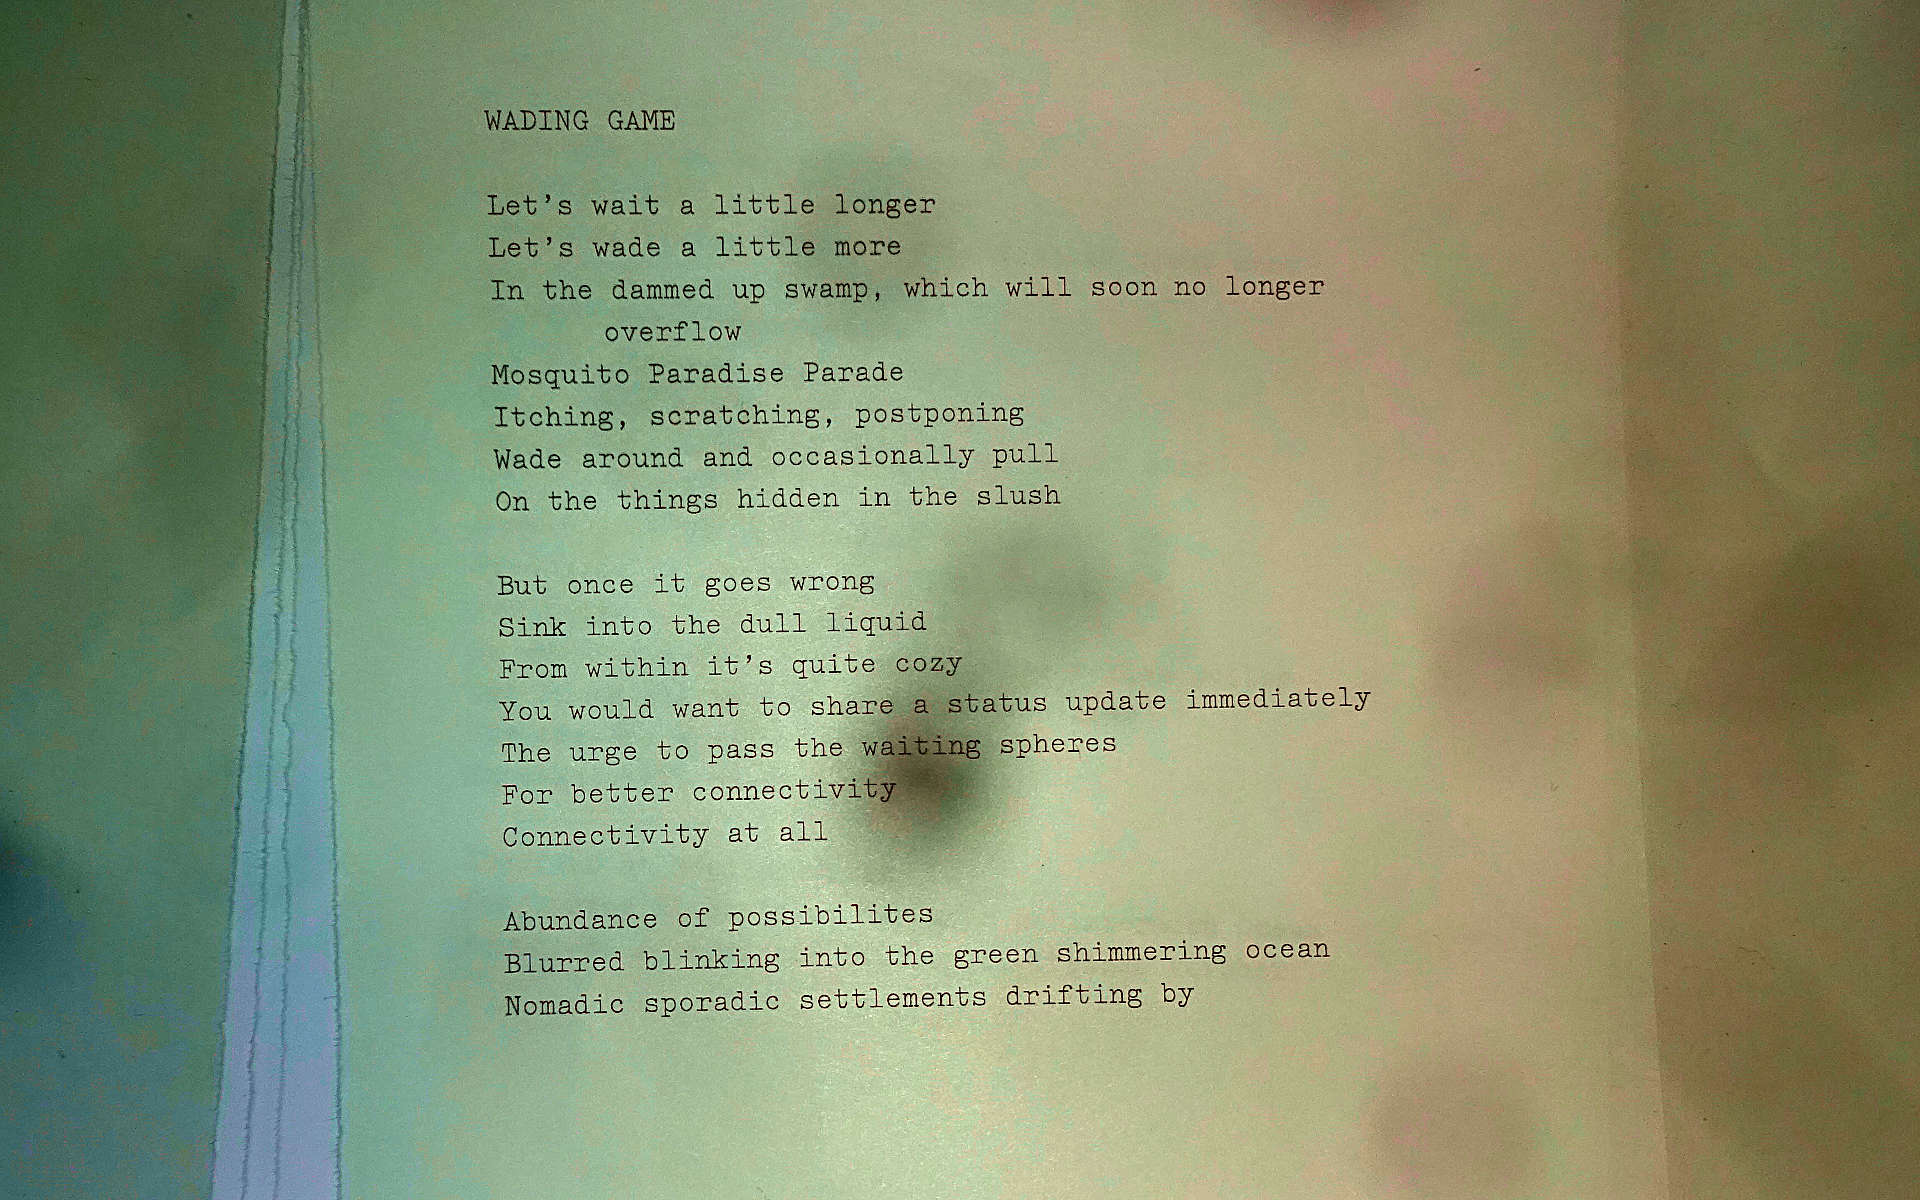 laser printed copy of the poem in a monospace typeface